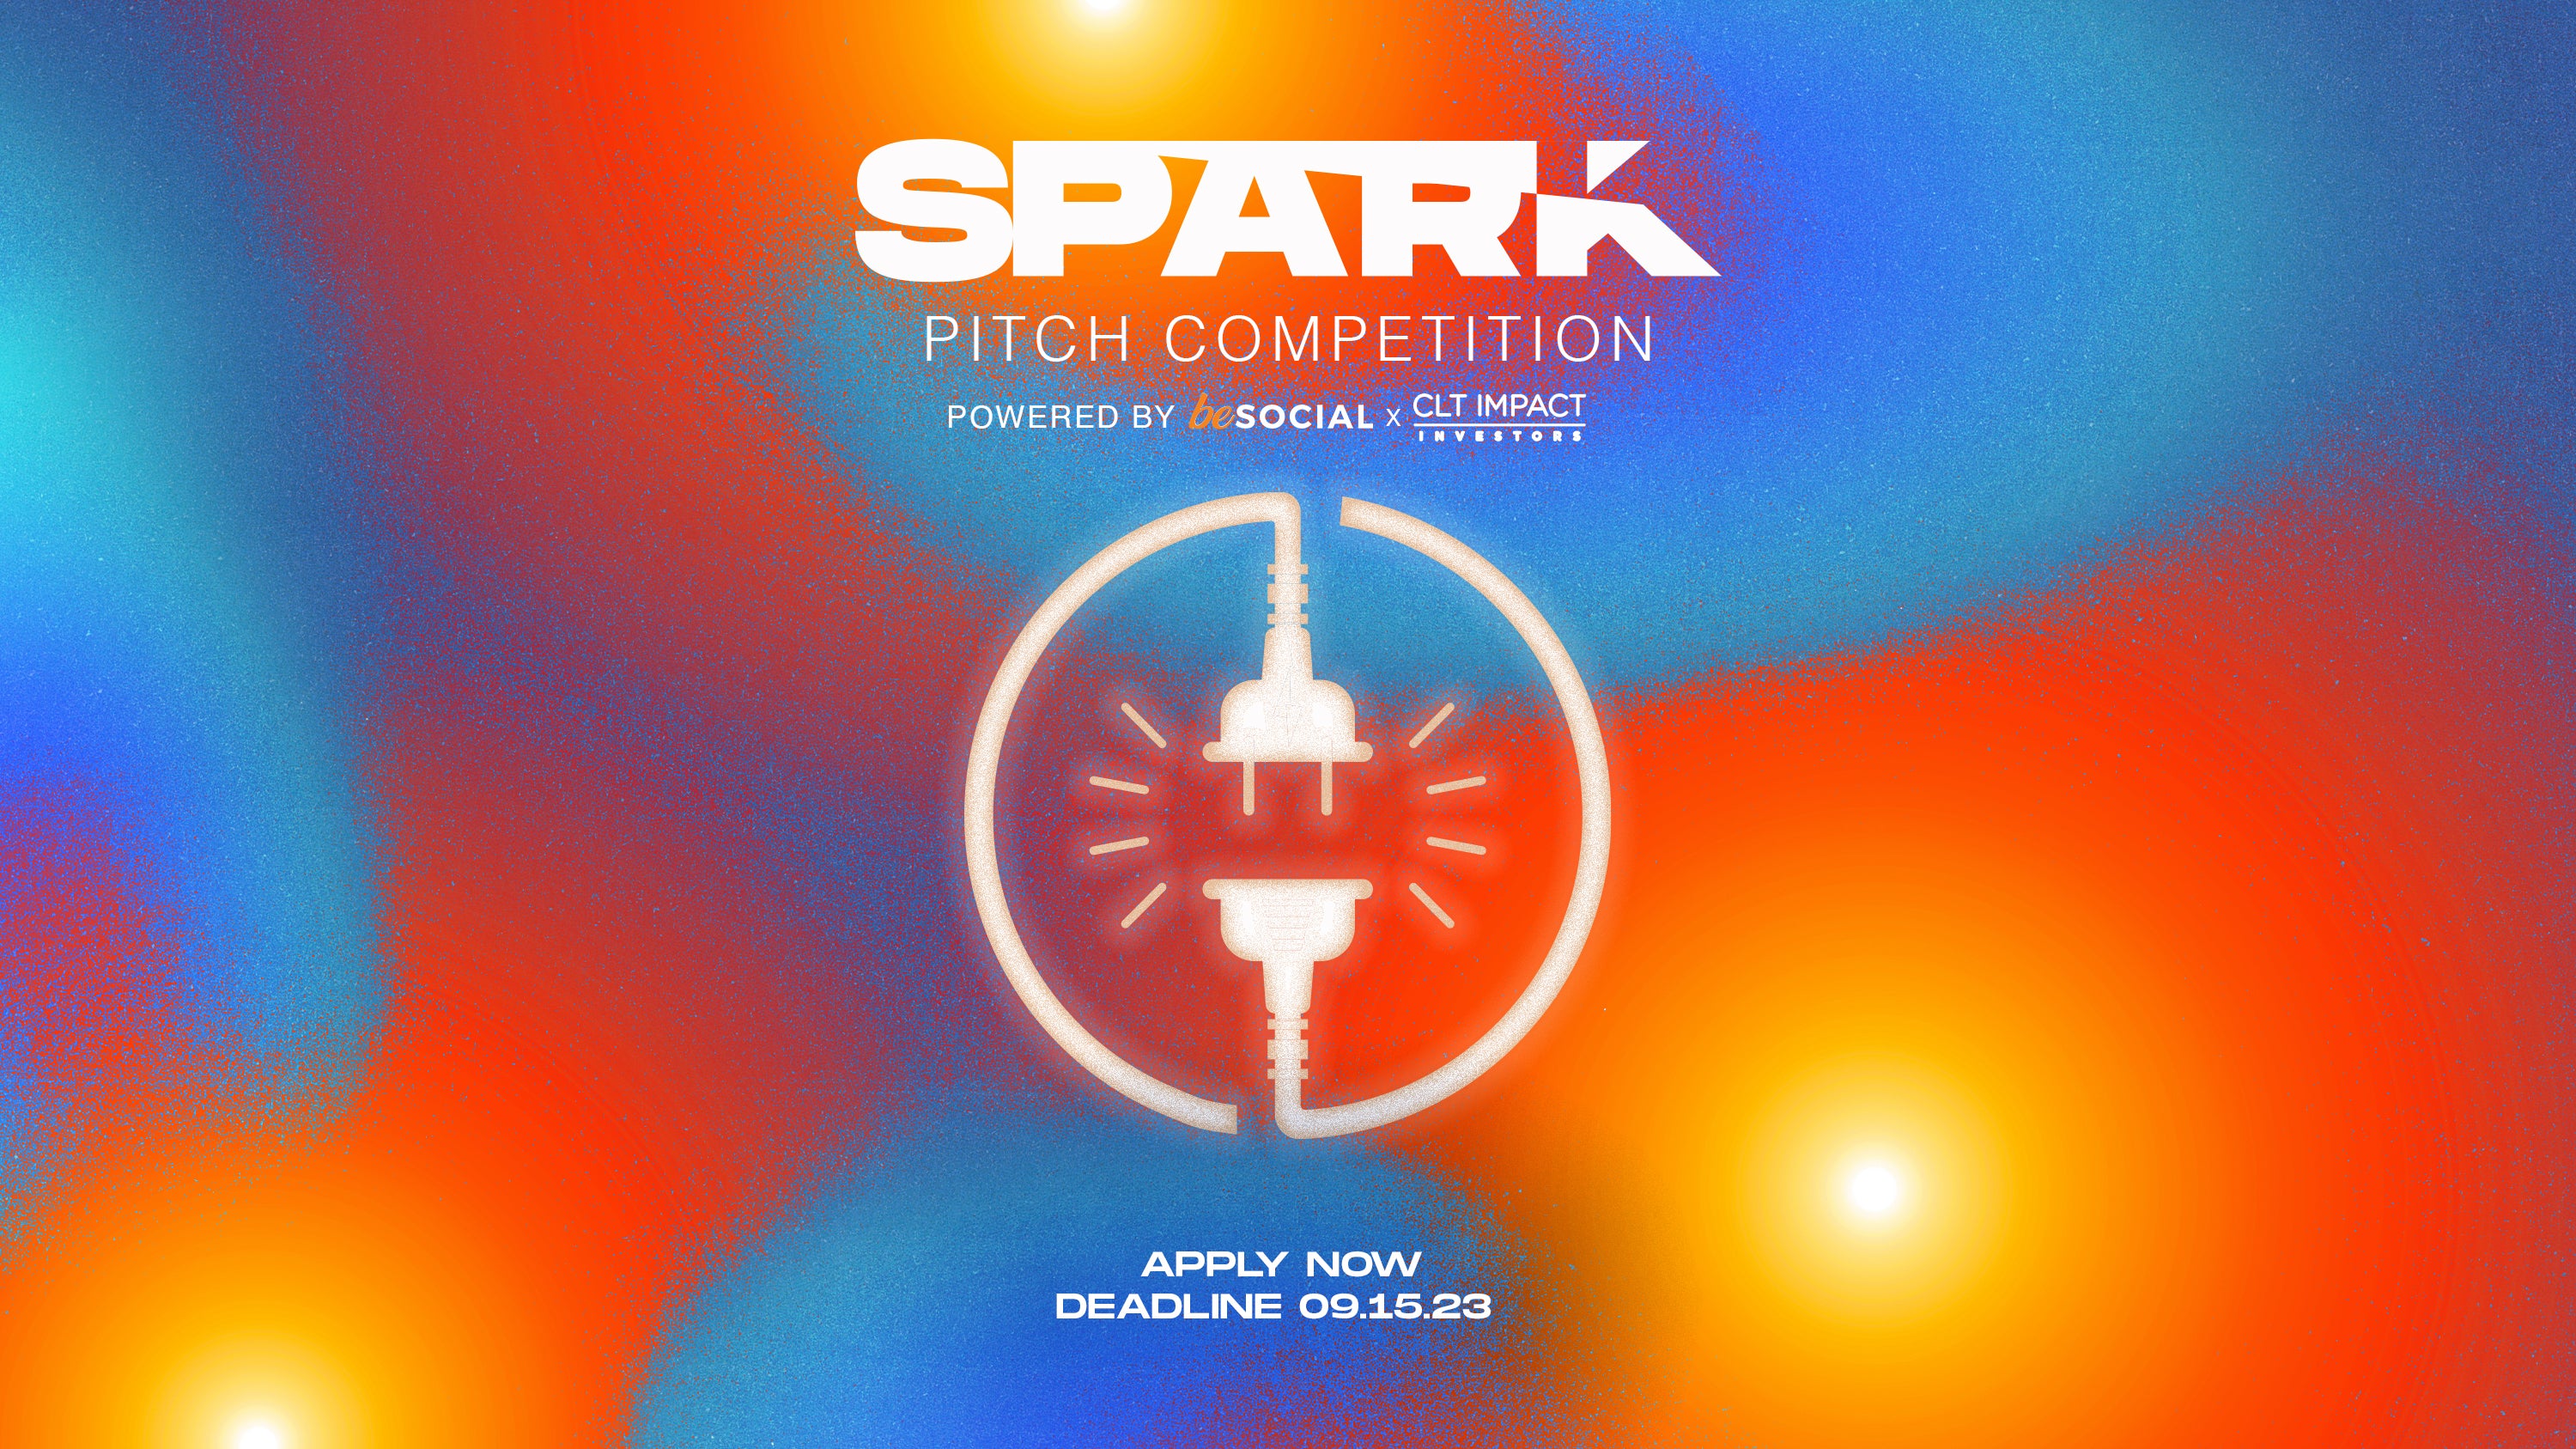 beSocial x CLT Impact Investors - SPARK Pitch Competition